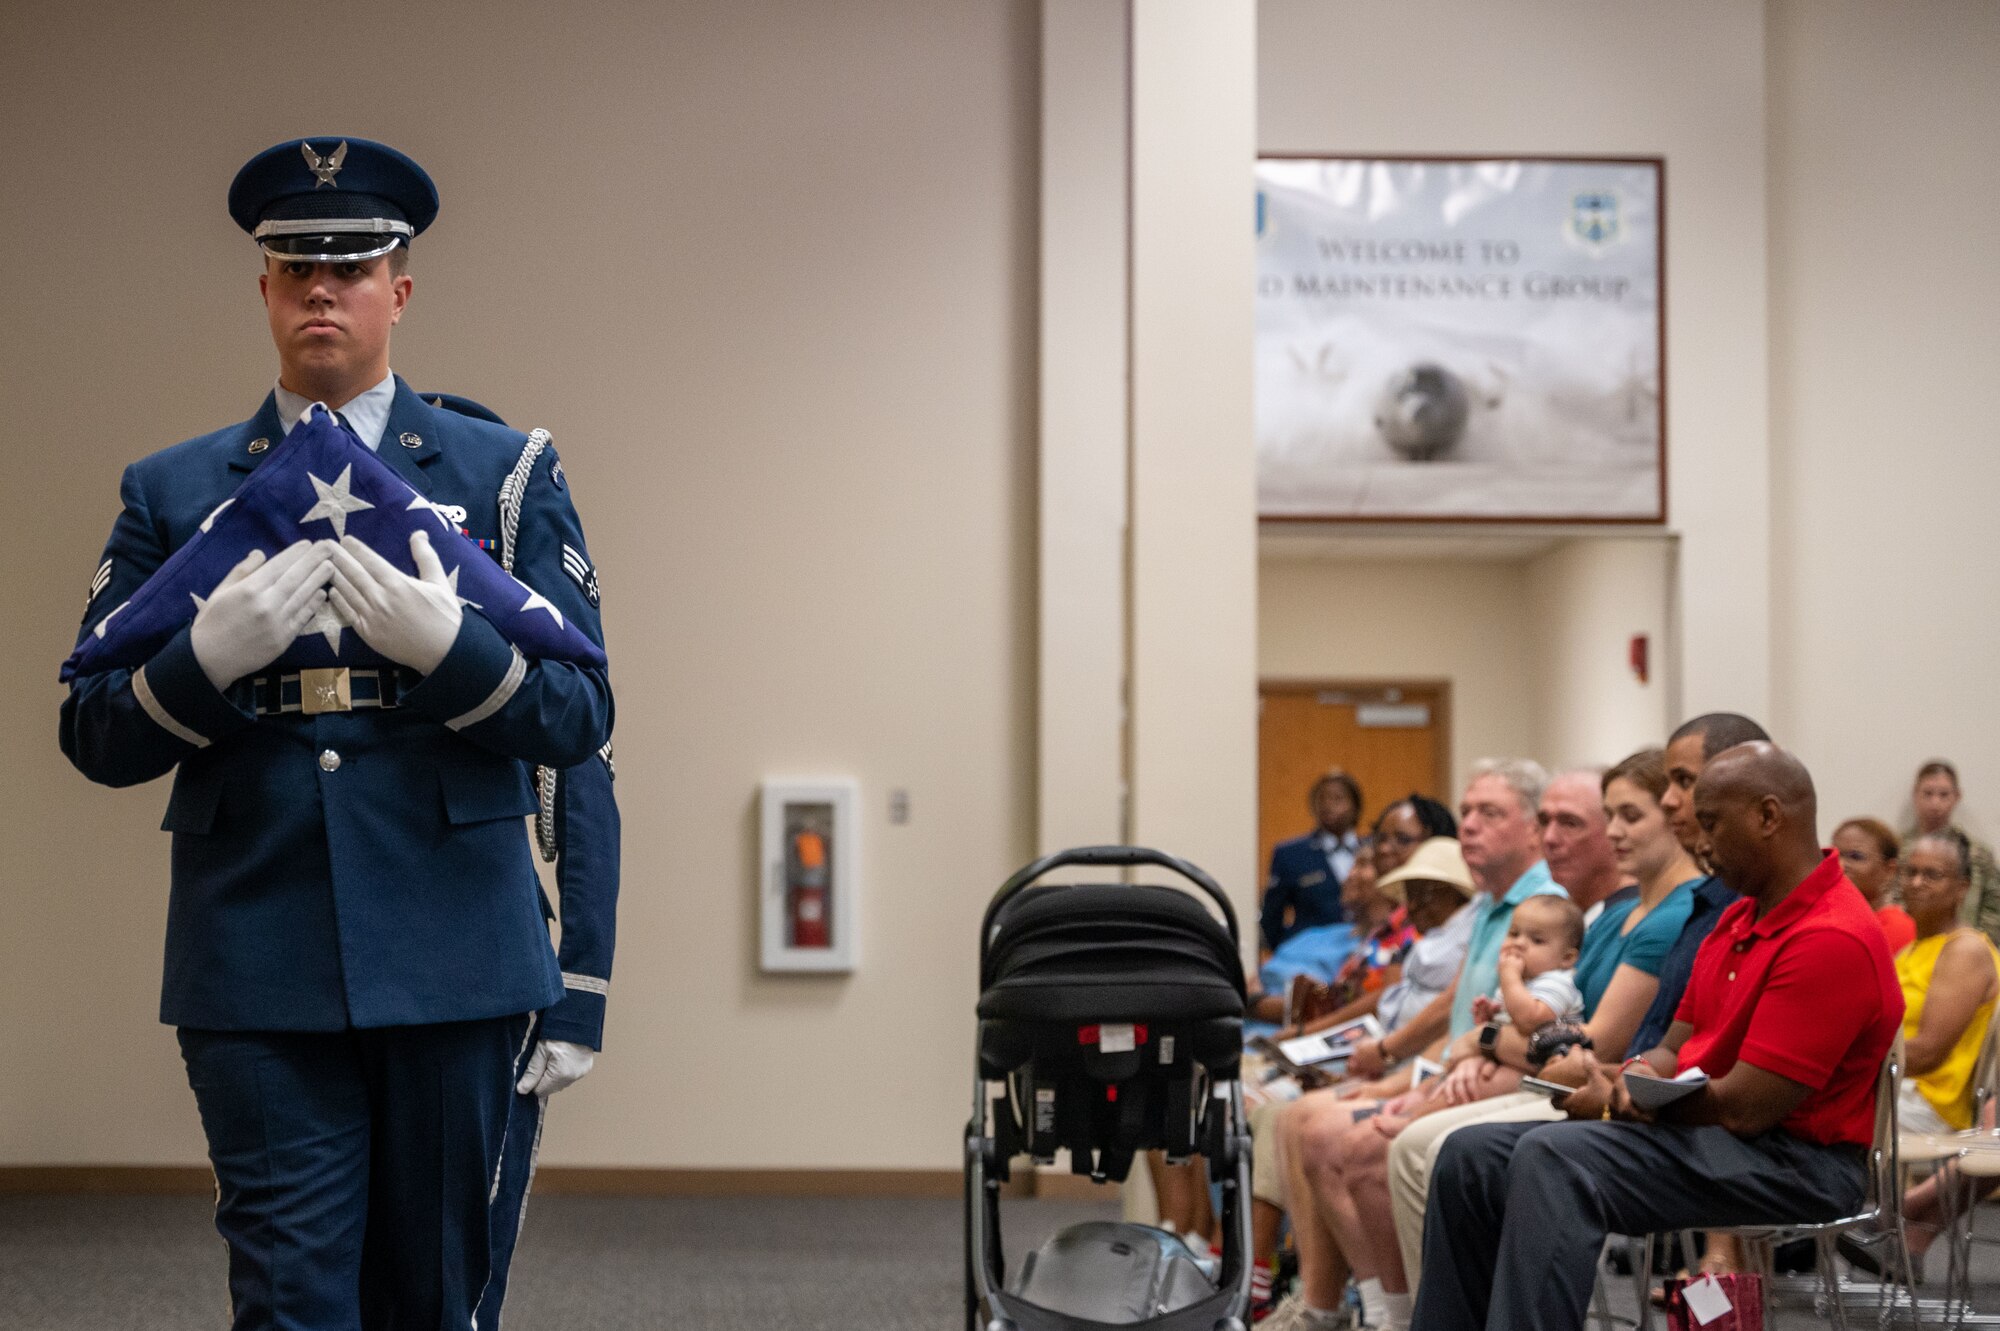 An Airman in service dress clutches a folded U.S. flag to his chest.